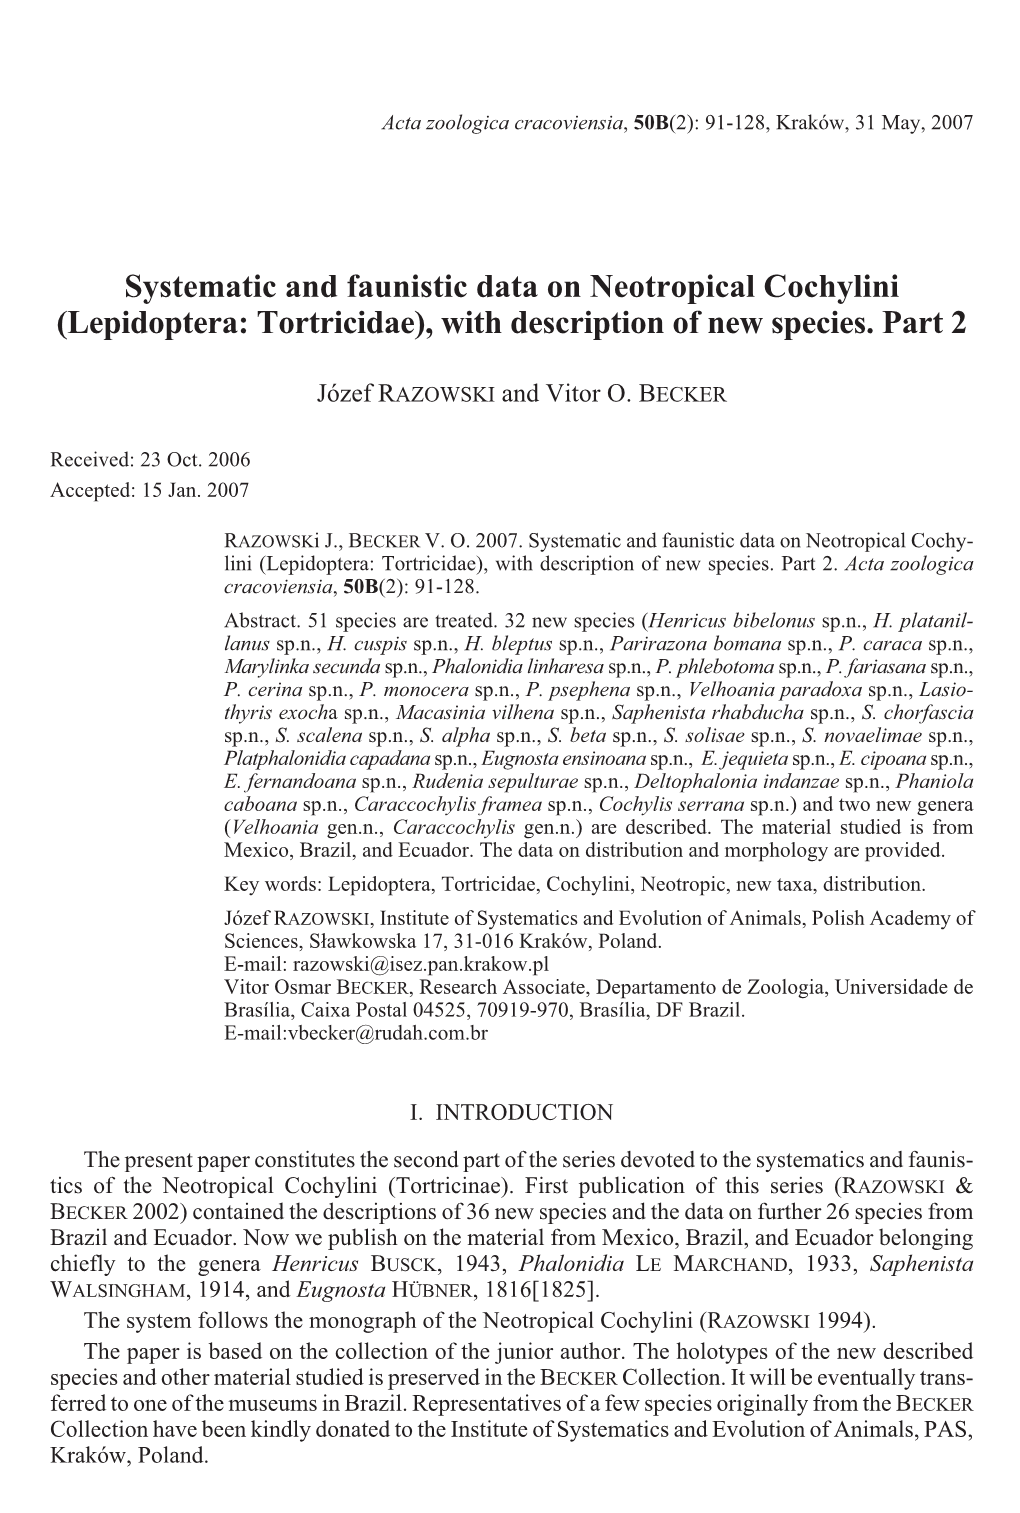 Systematic and Faunistic Data on Neotropical Cochylini (Lepidoptera: Tortricidae), with Description of New Species